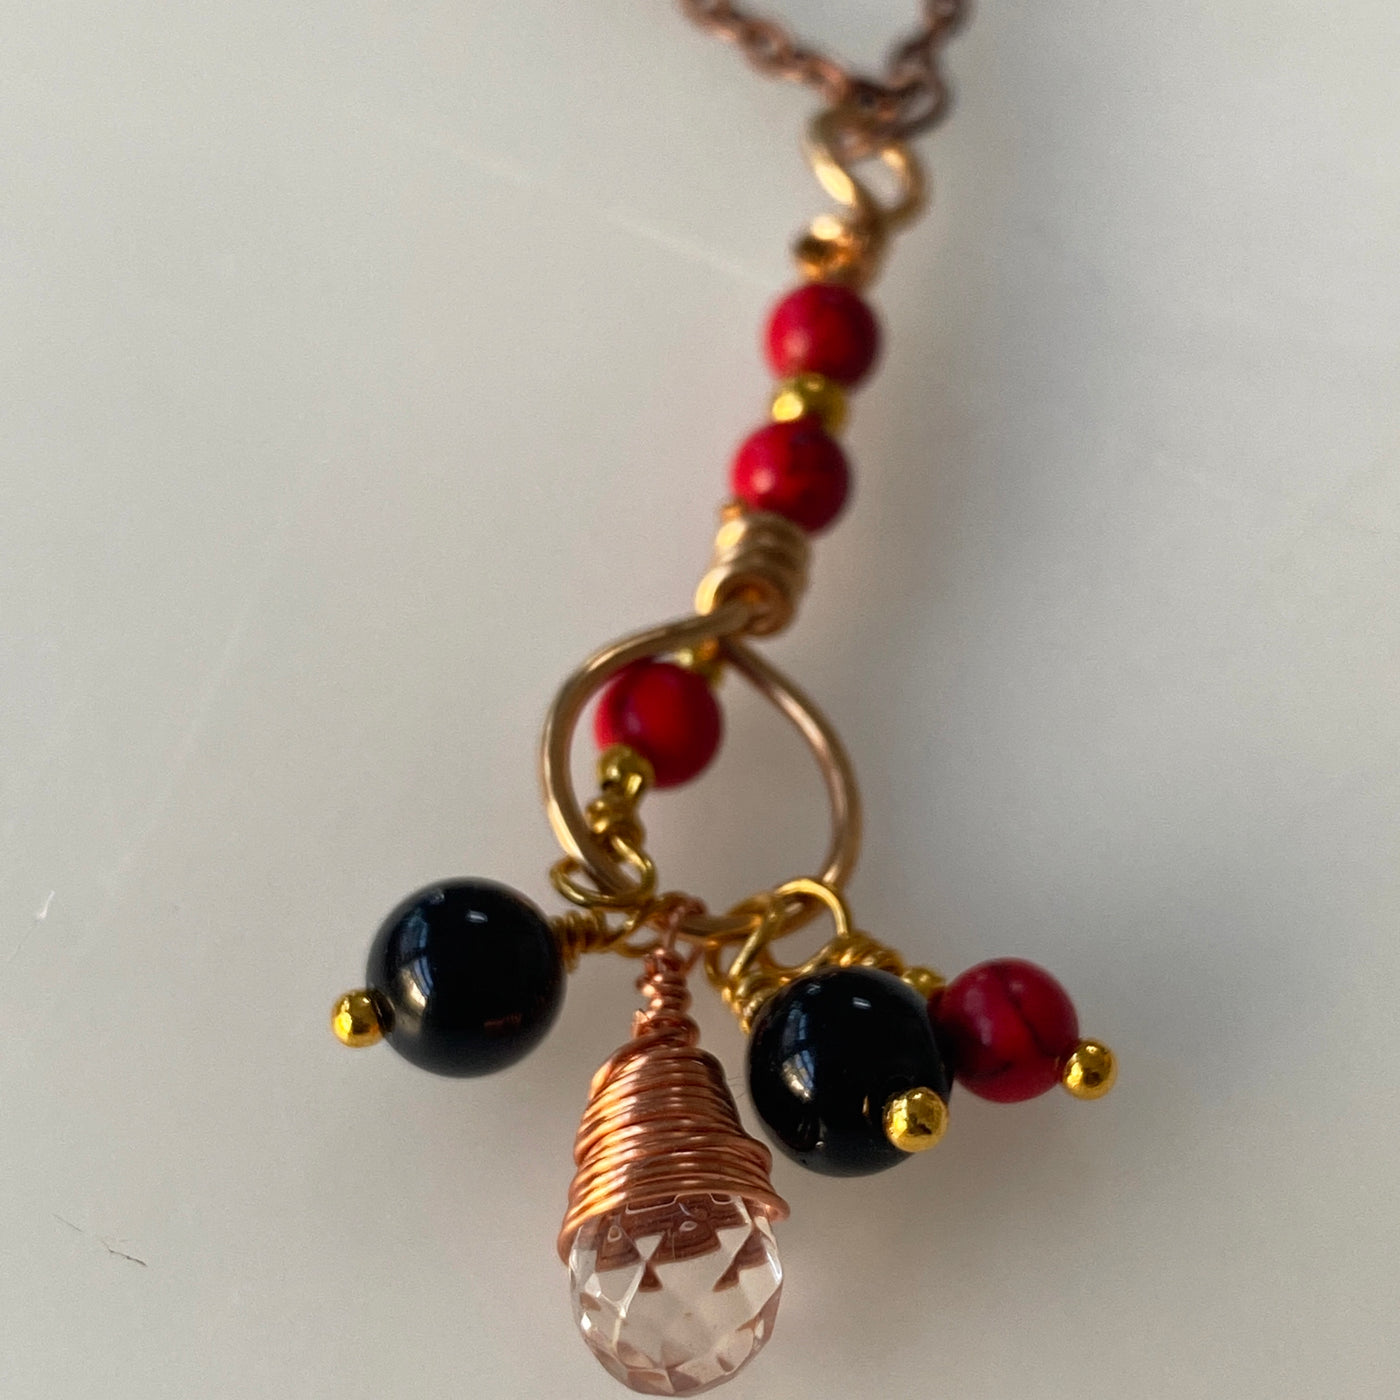 Pendant: Onice, red turquoise and quartz briolette for Shake and move collection